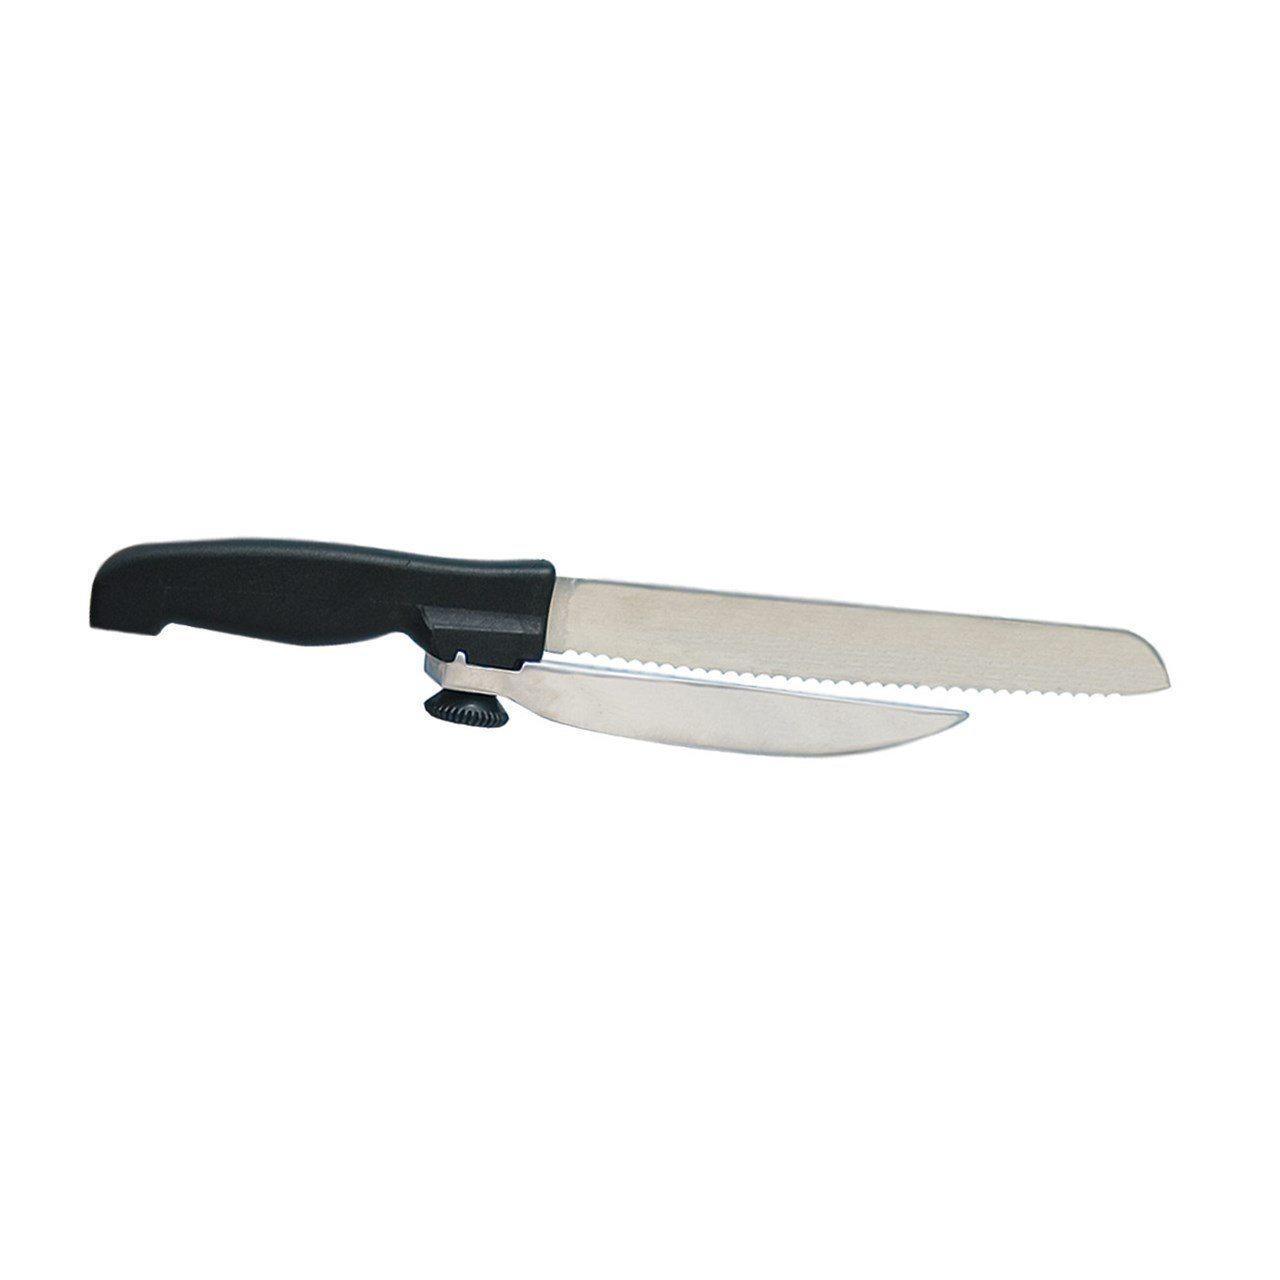 H.E.L.P. Magic Slicing Knife - The Low Vision Store